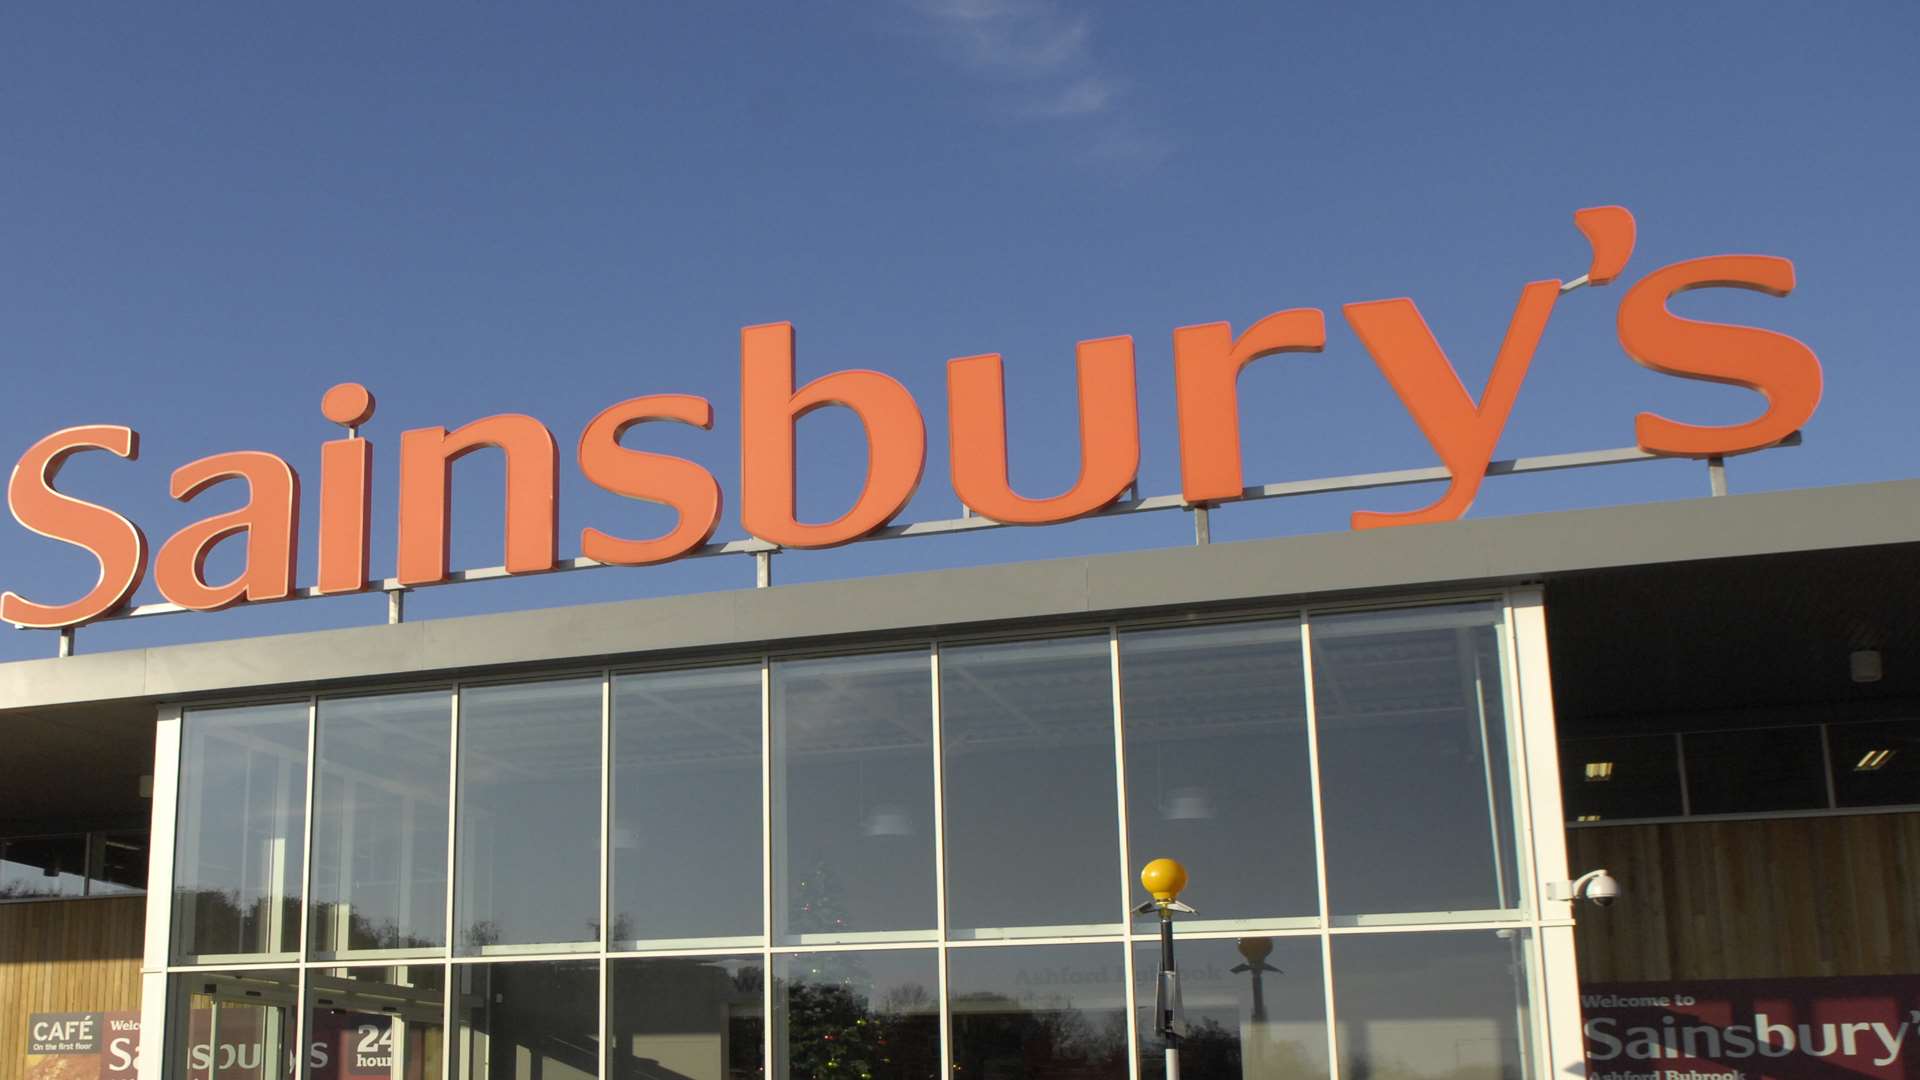 Sainsbury's is pulling out of two projects in Kent